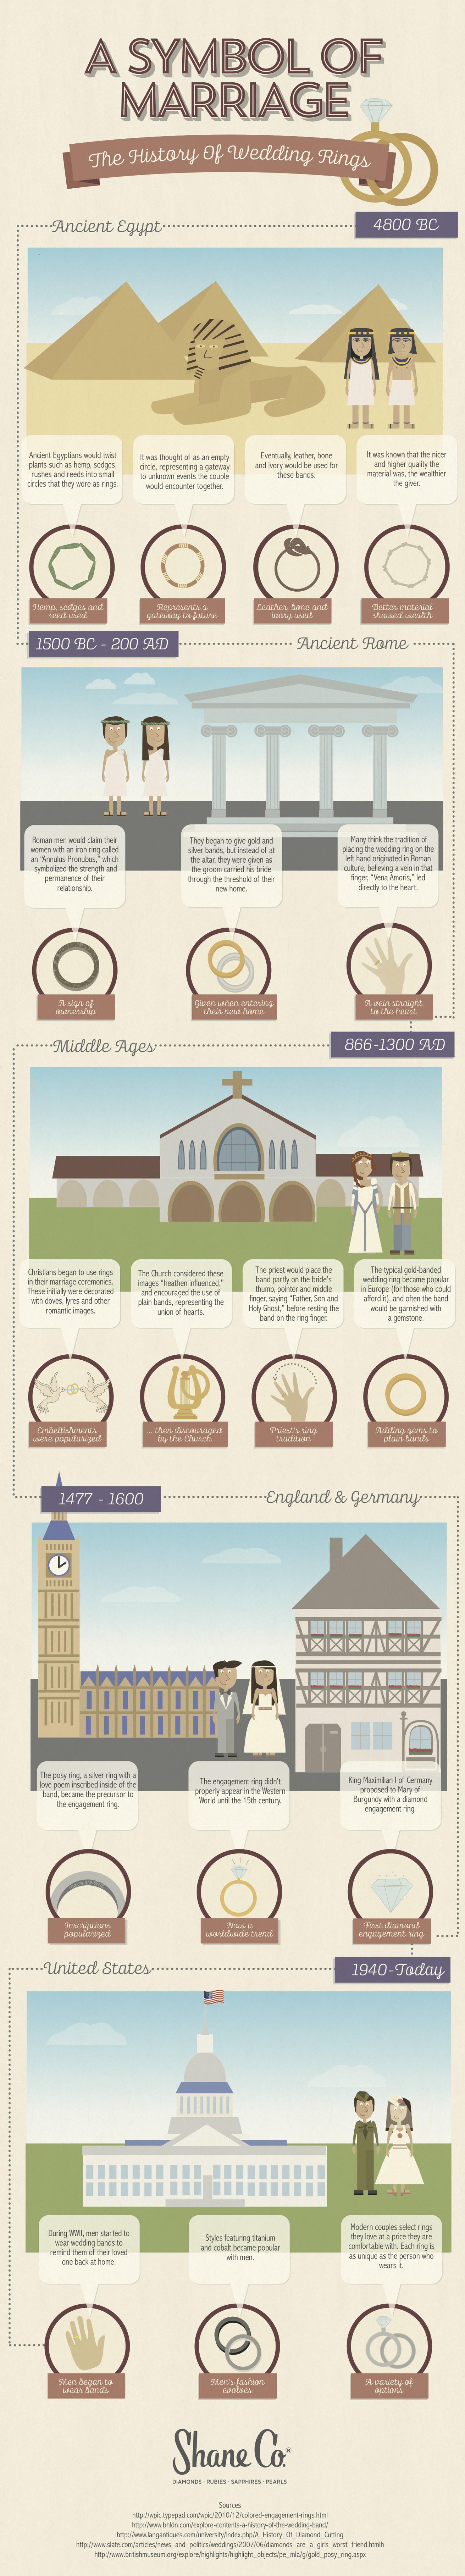 The History of Wedding Rings - Infographic